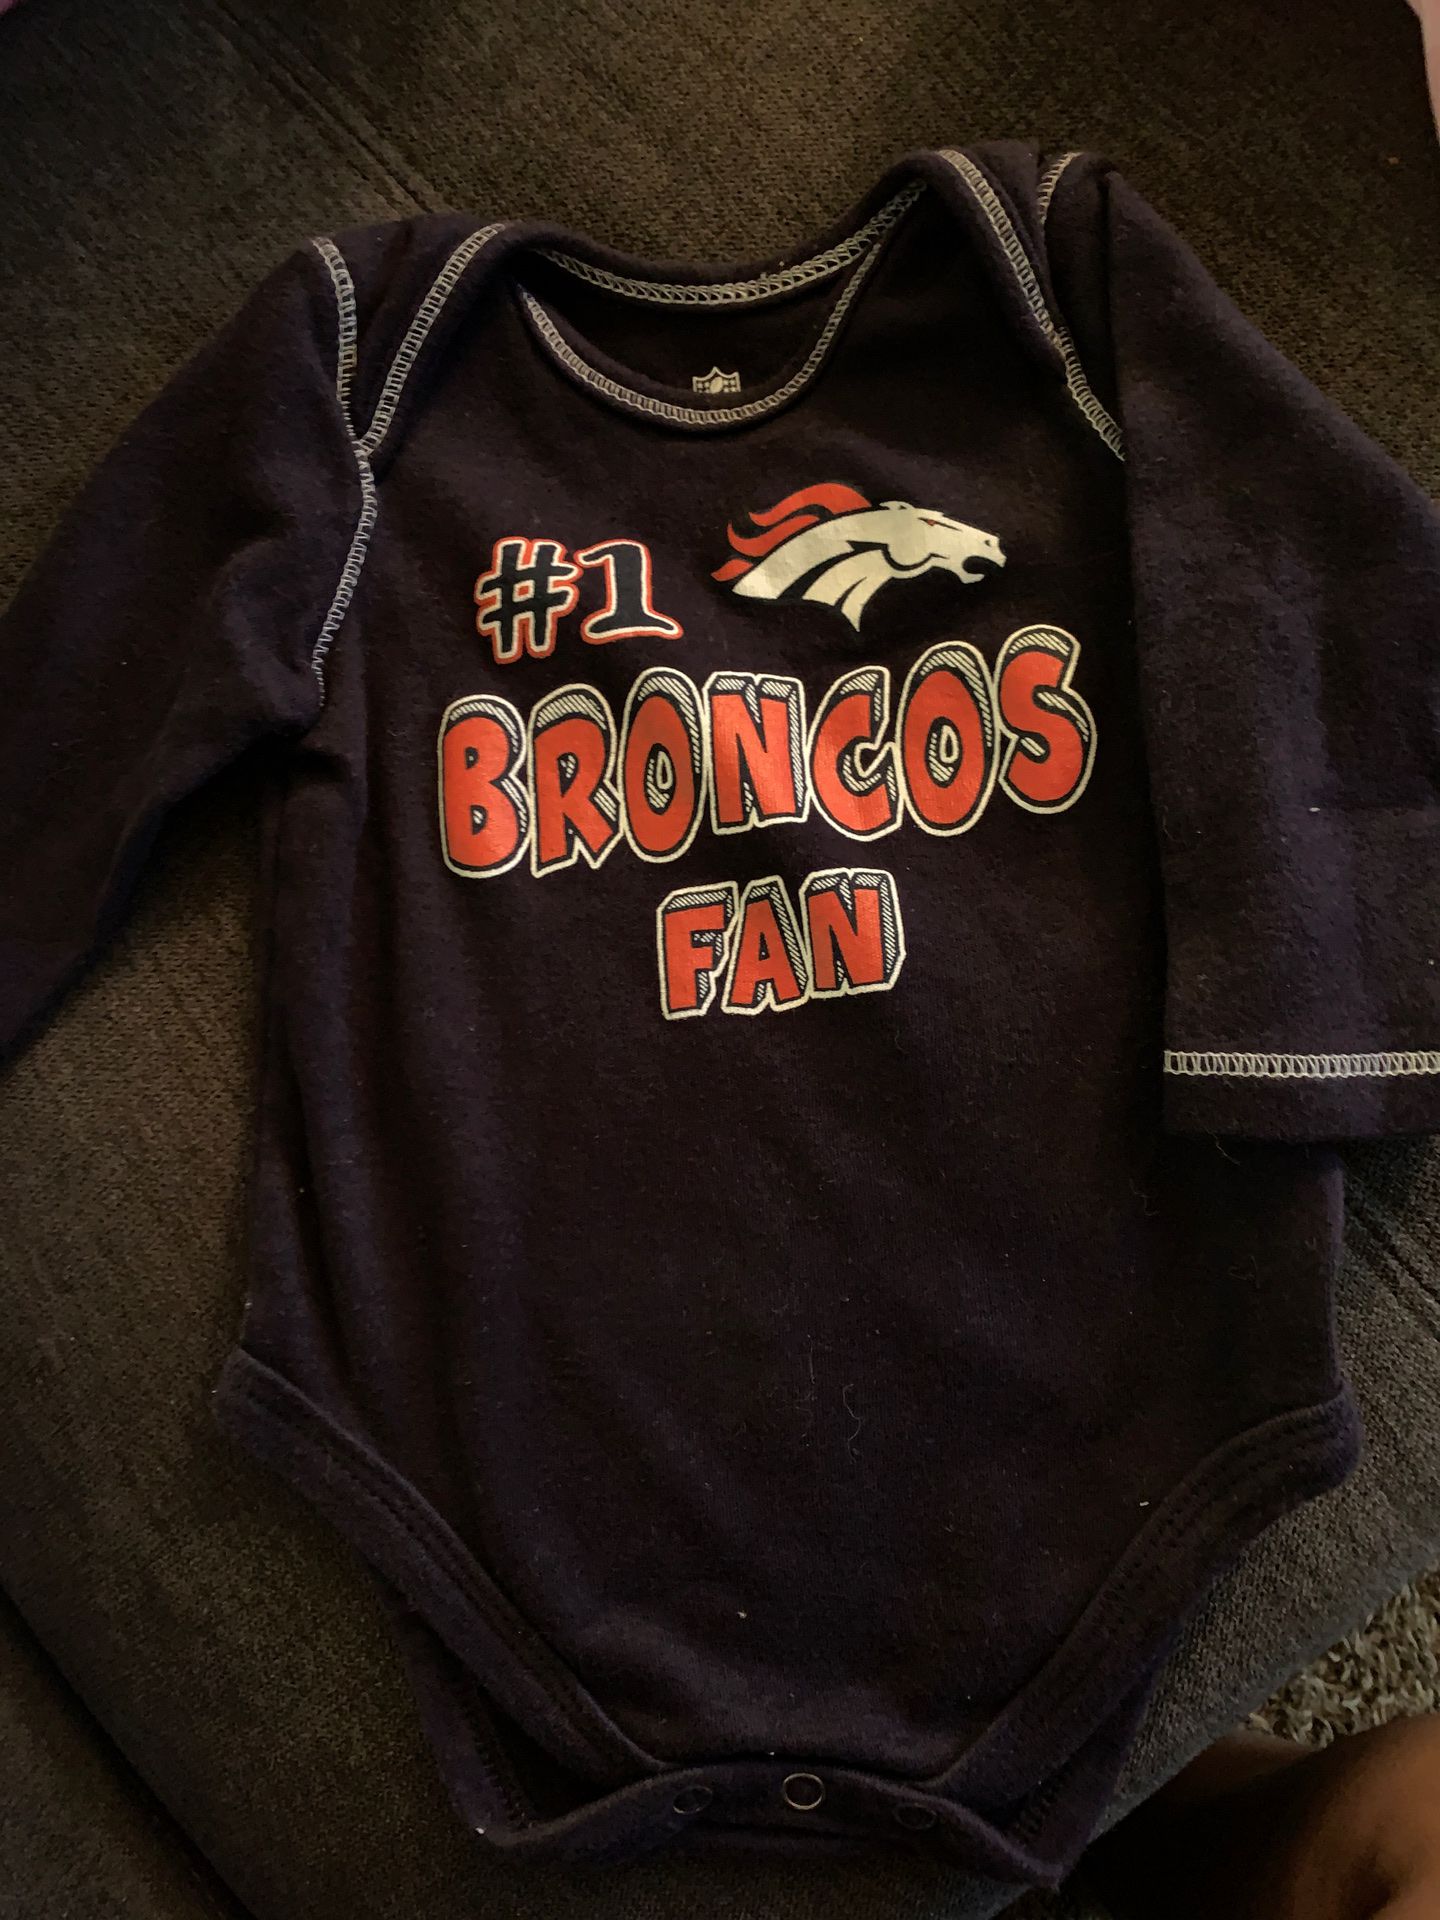 Free Broncos baby 3-6 months